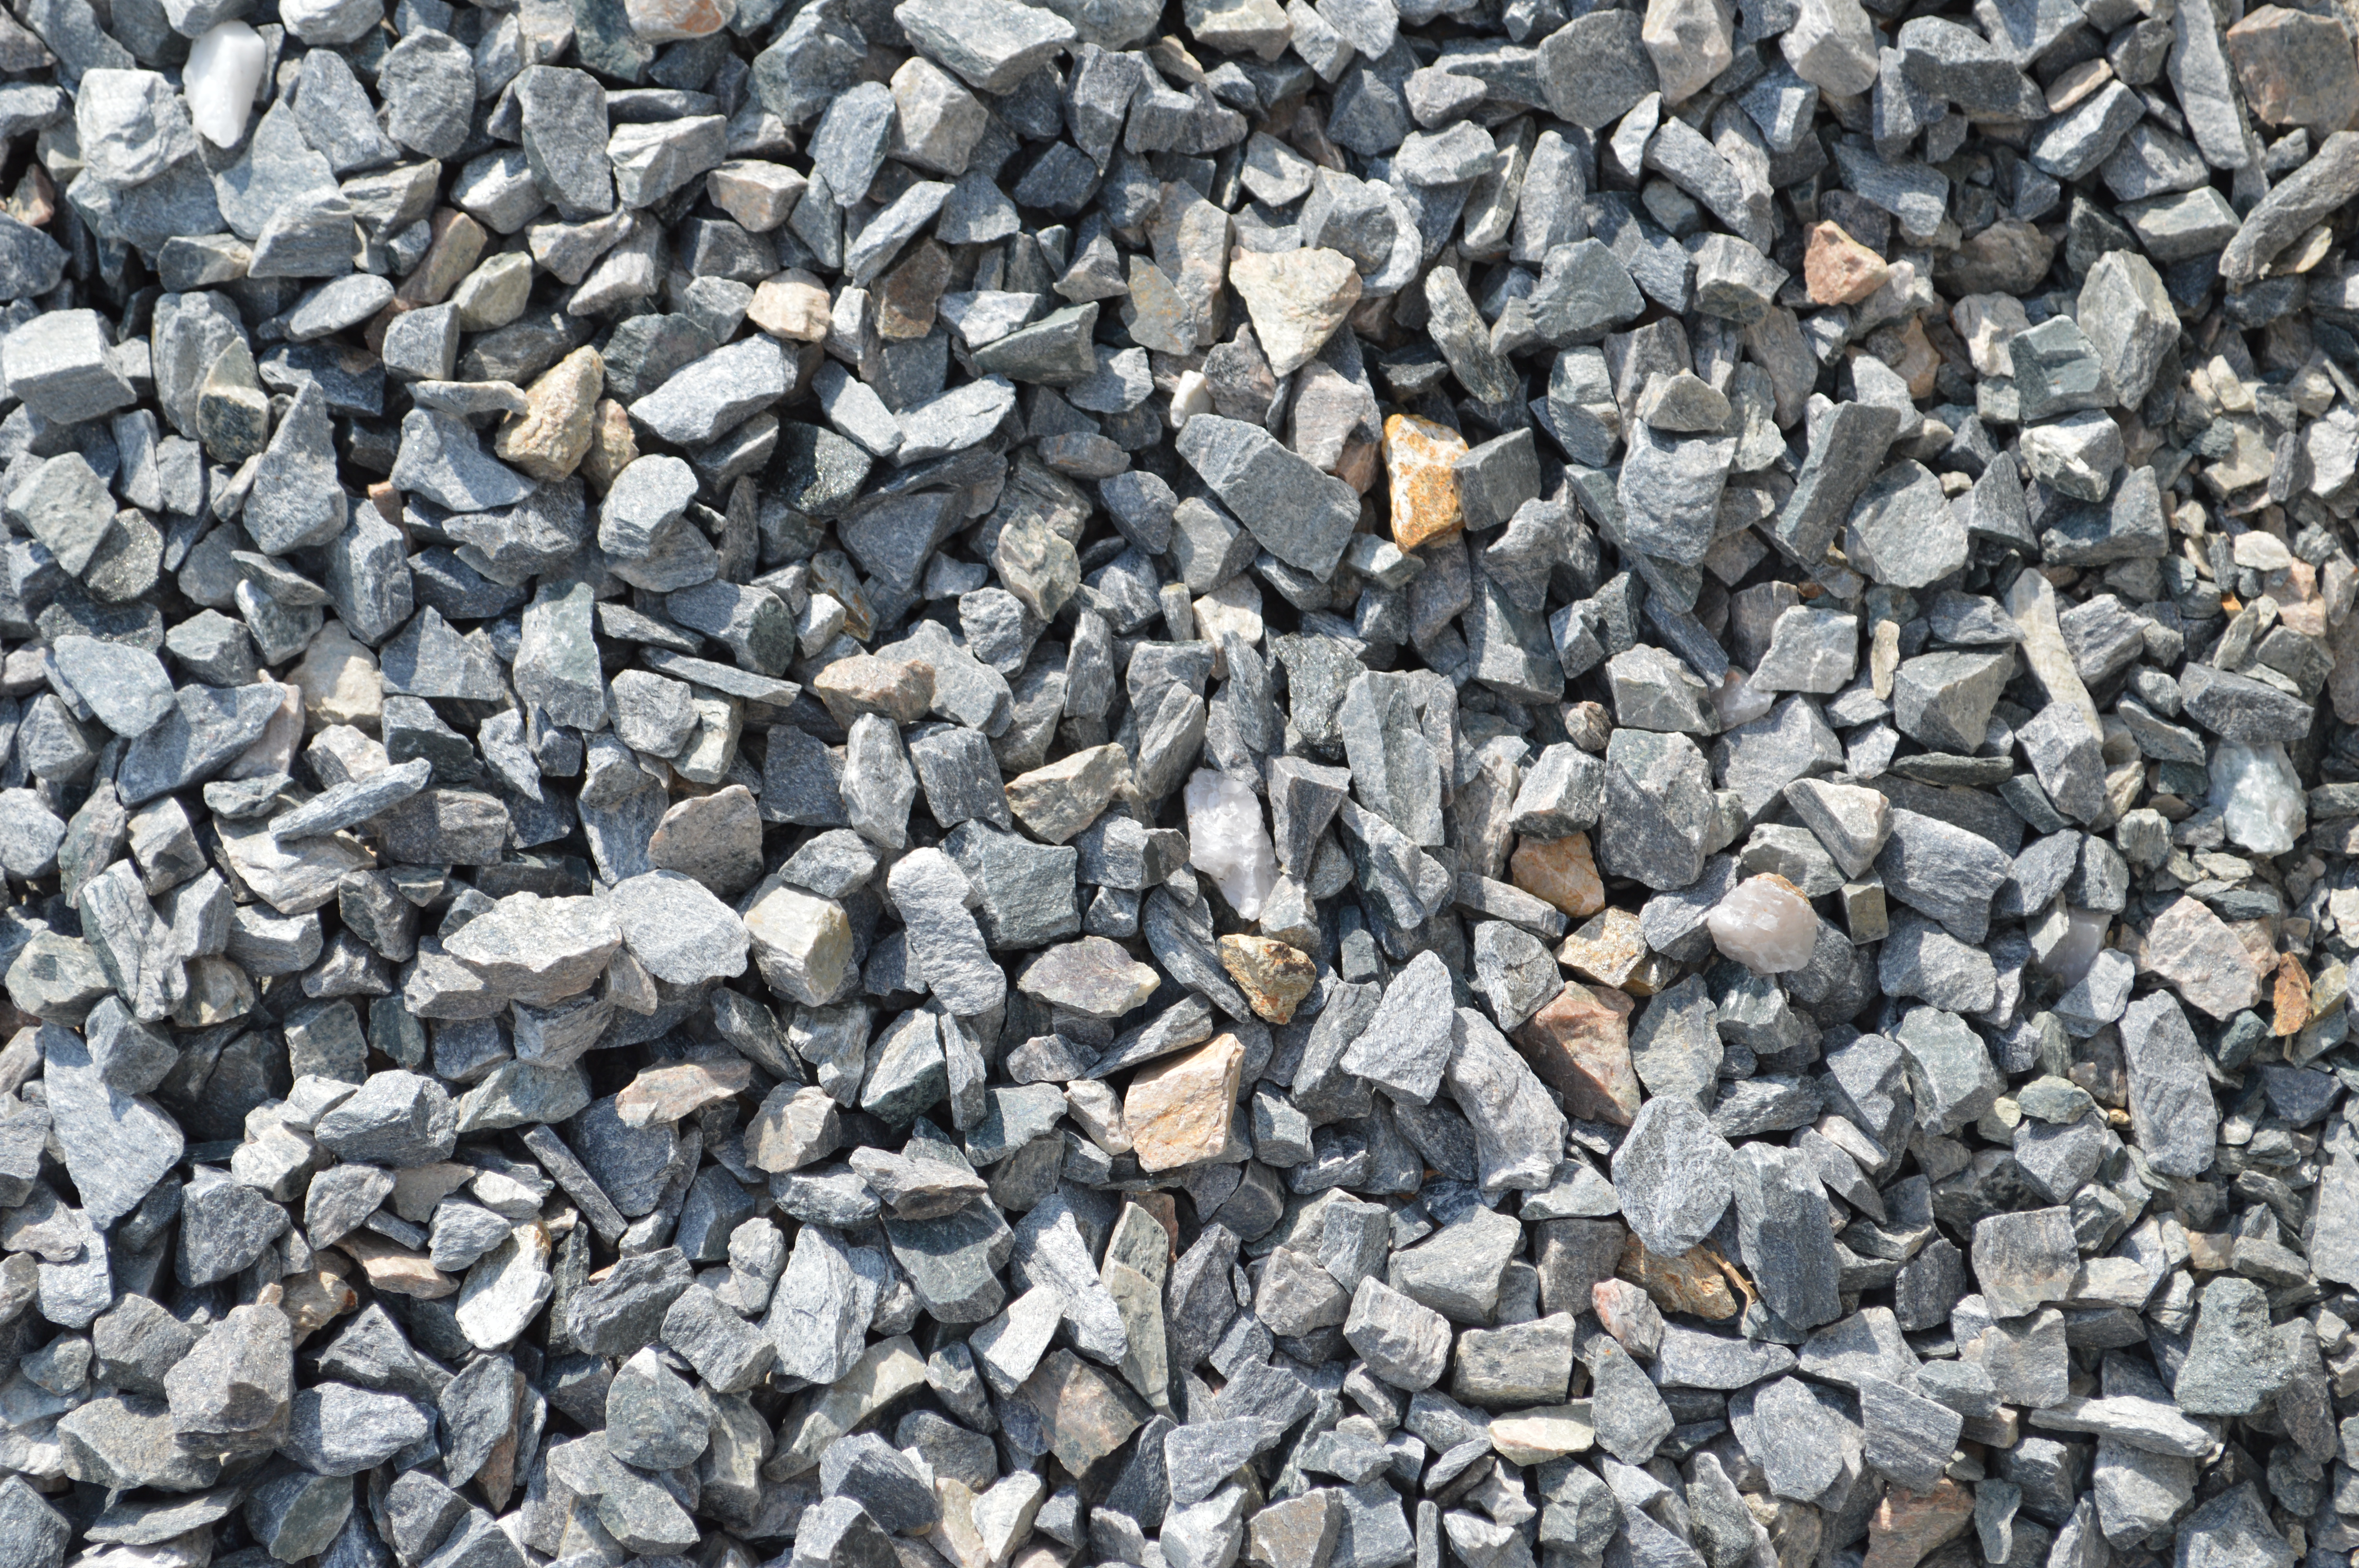 download gravel for free